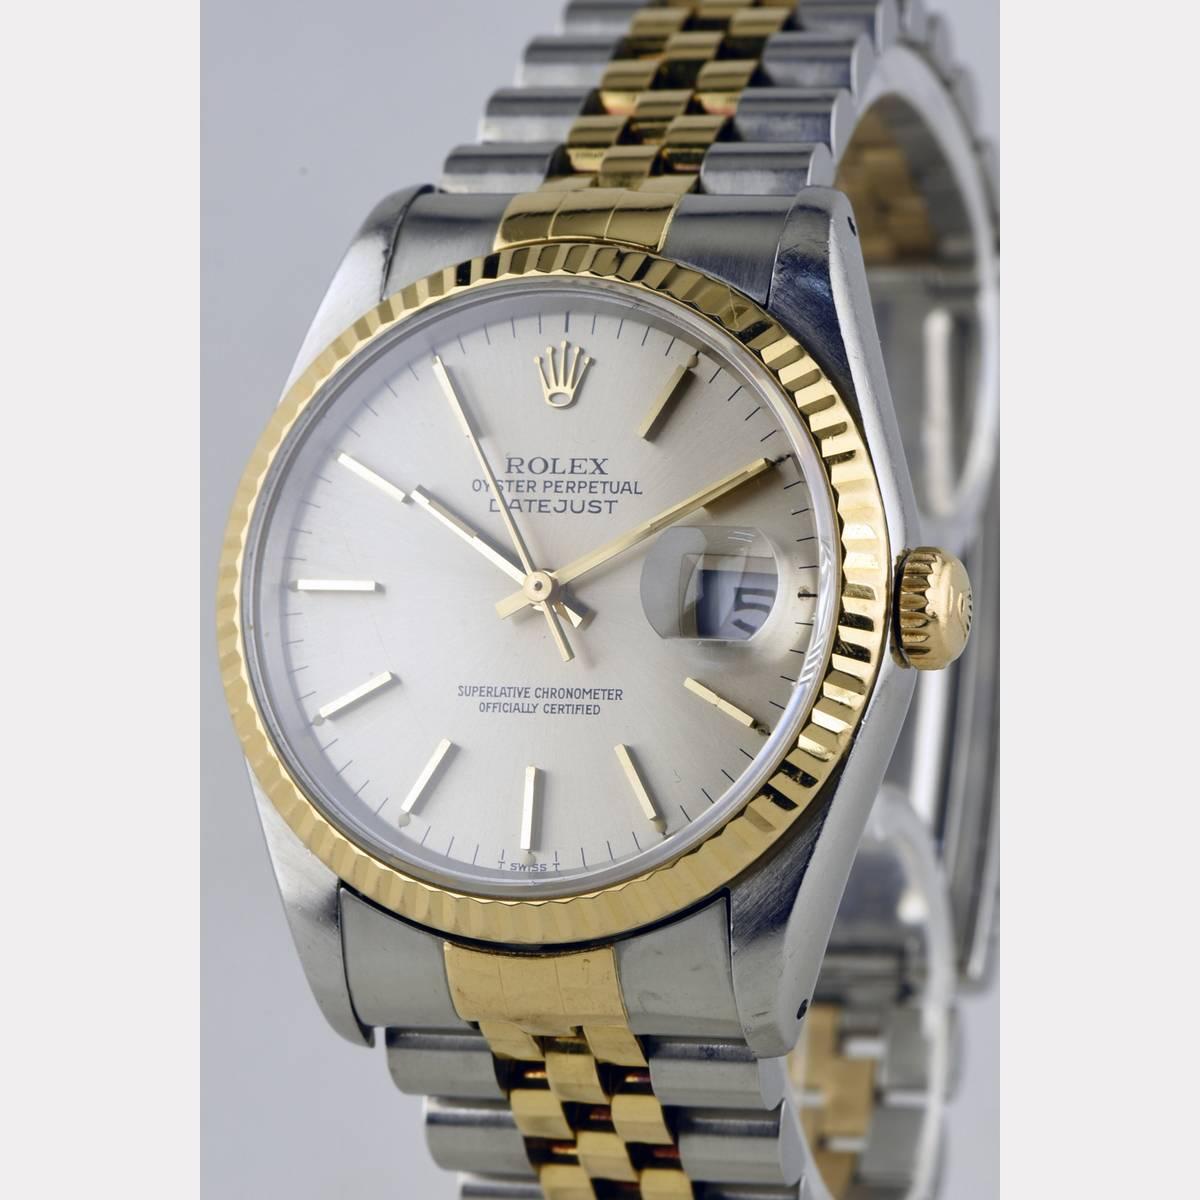 A beautiful ROLEX Datejust Men's Model, the classic with silver-colored Dial with golden hands and golden bar indices. Especially this warm combination stainless steel with gold makes the charm of this watch, it can be worn to gold or silver very